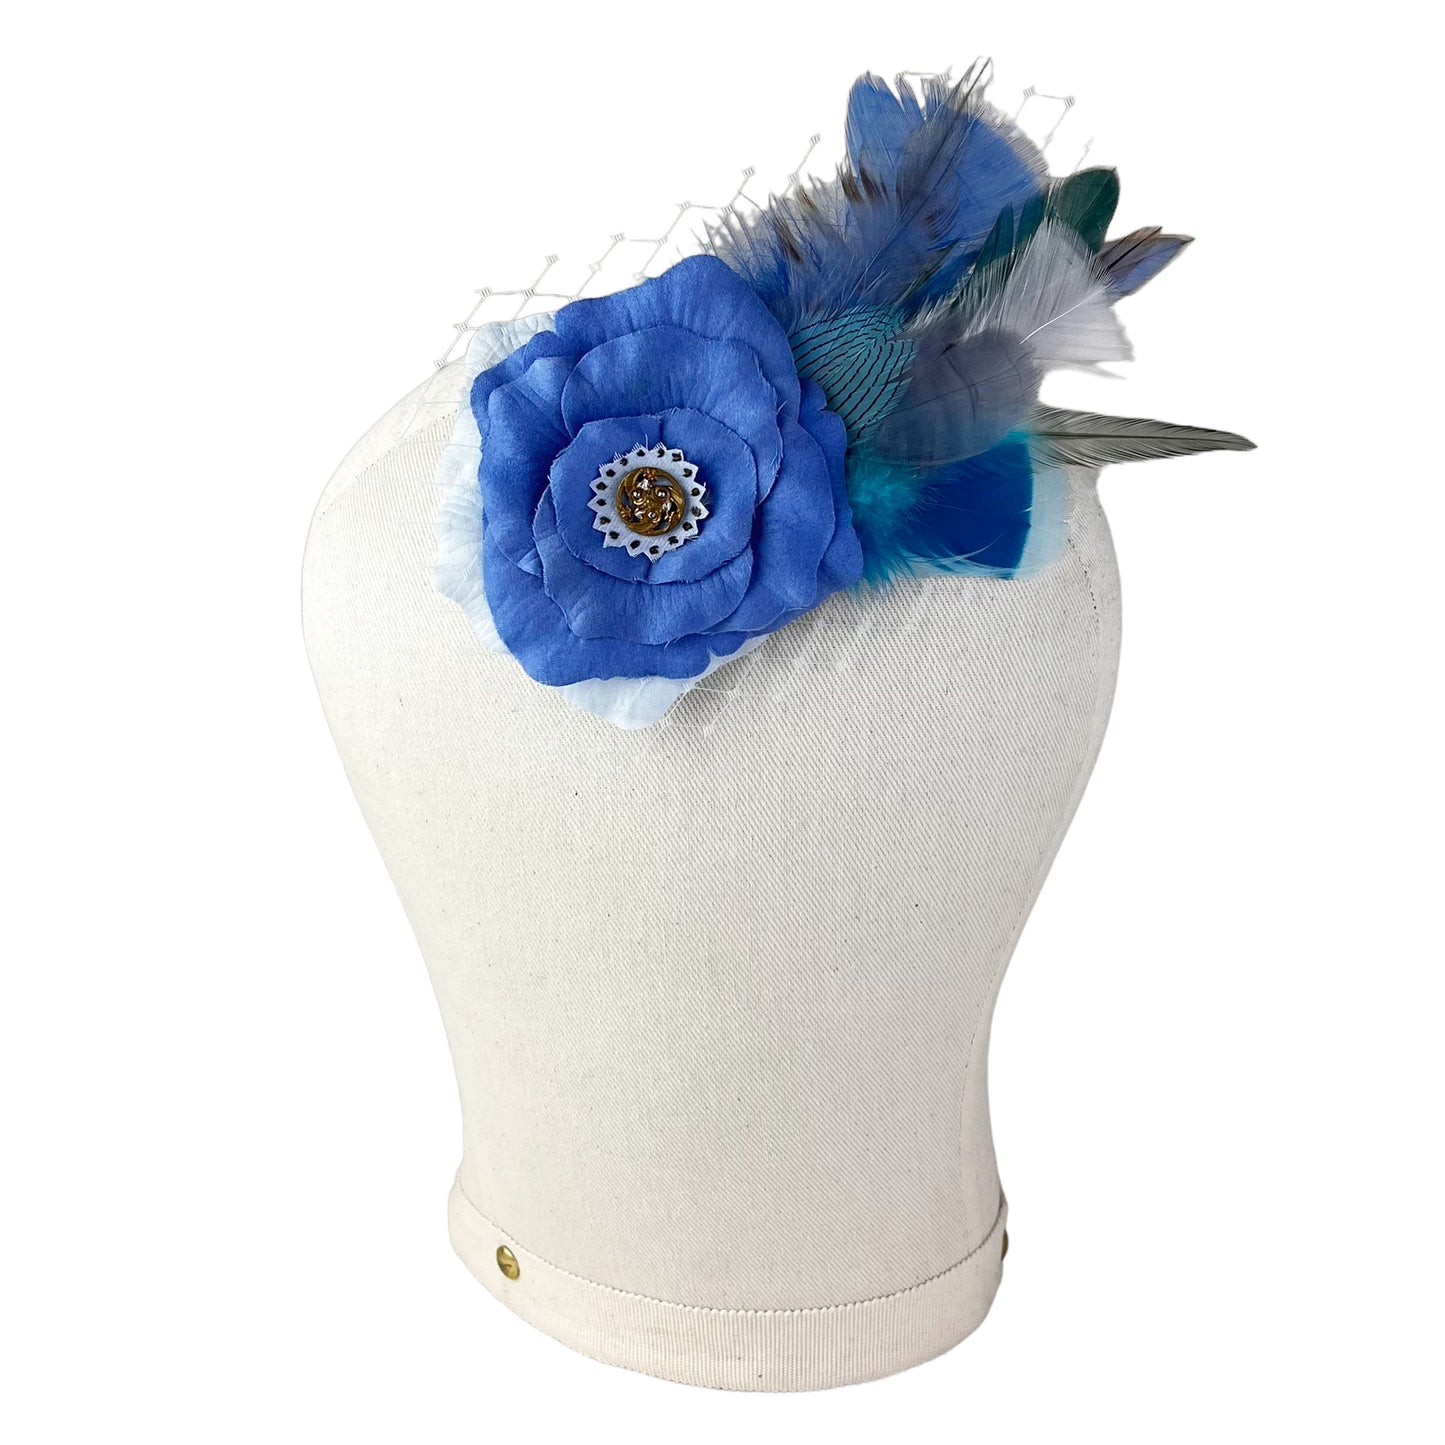 Rose Feather Fascinator Hair Clip Periwinkle Blue